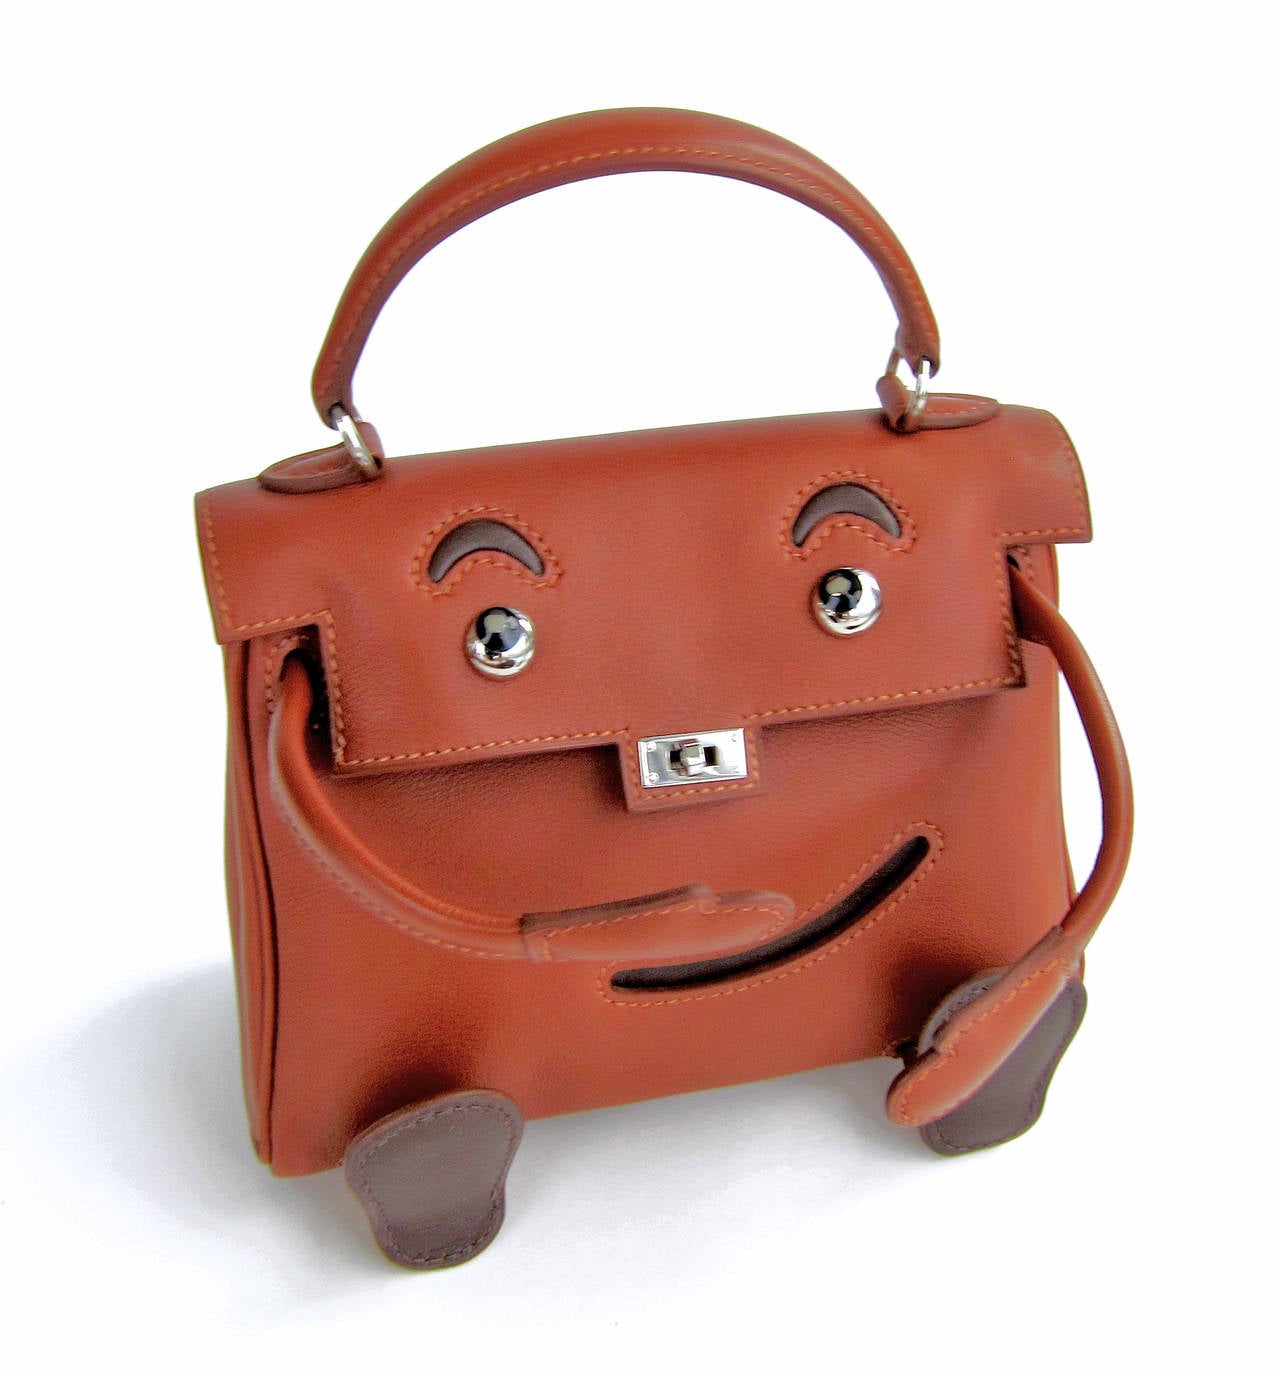 Hermes Quelle Idole Kelly Doll Bag Noisette Leather Rare Limited Edition 
Extremely limited edition Hermes Kelly Doll bag.
Completely rare and very few exist in the world today.
This shrunken down Kelly bag is beyond precious.
Adorned with a